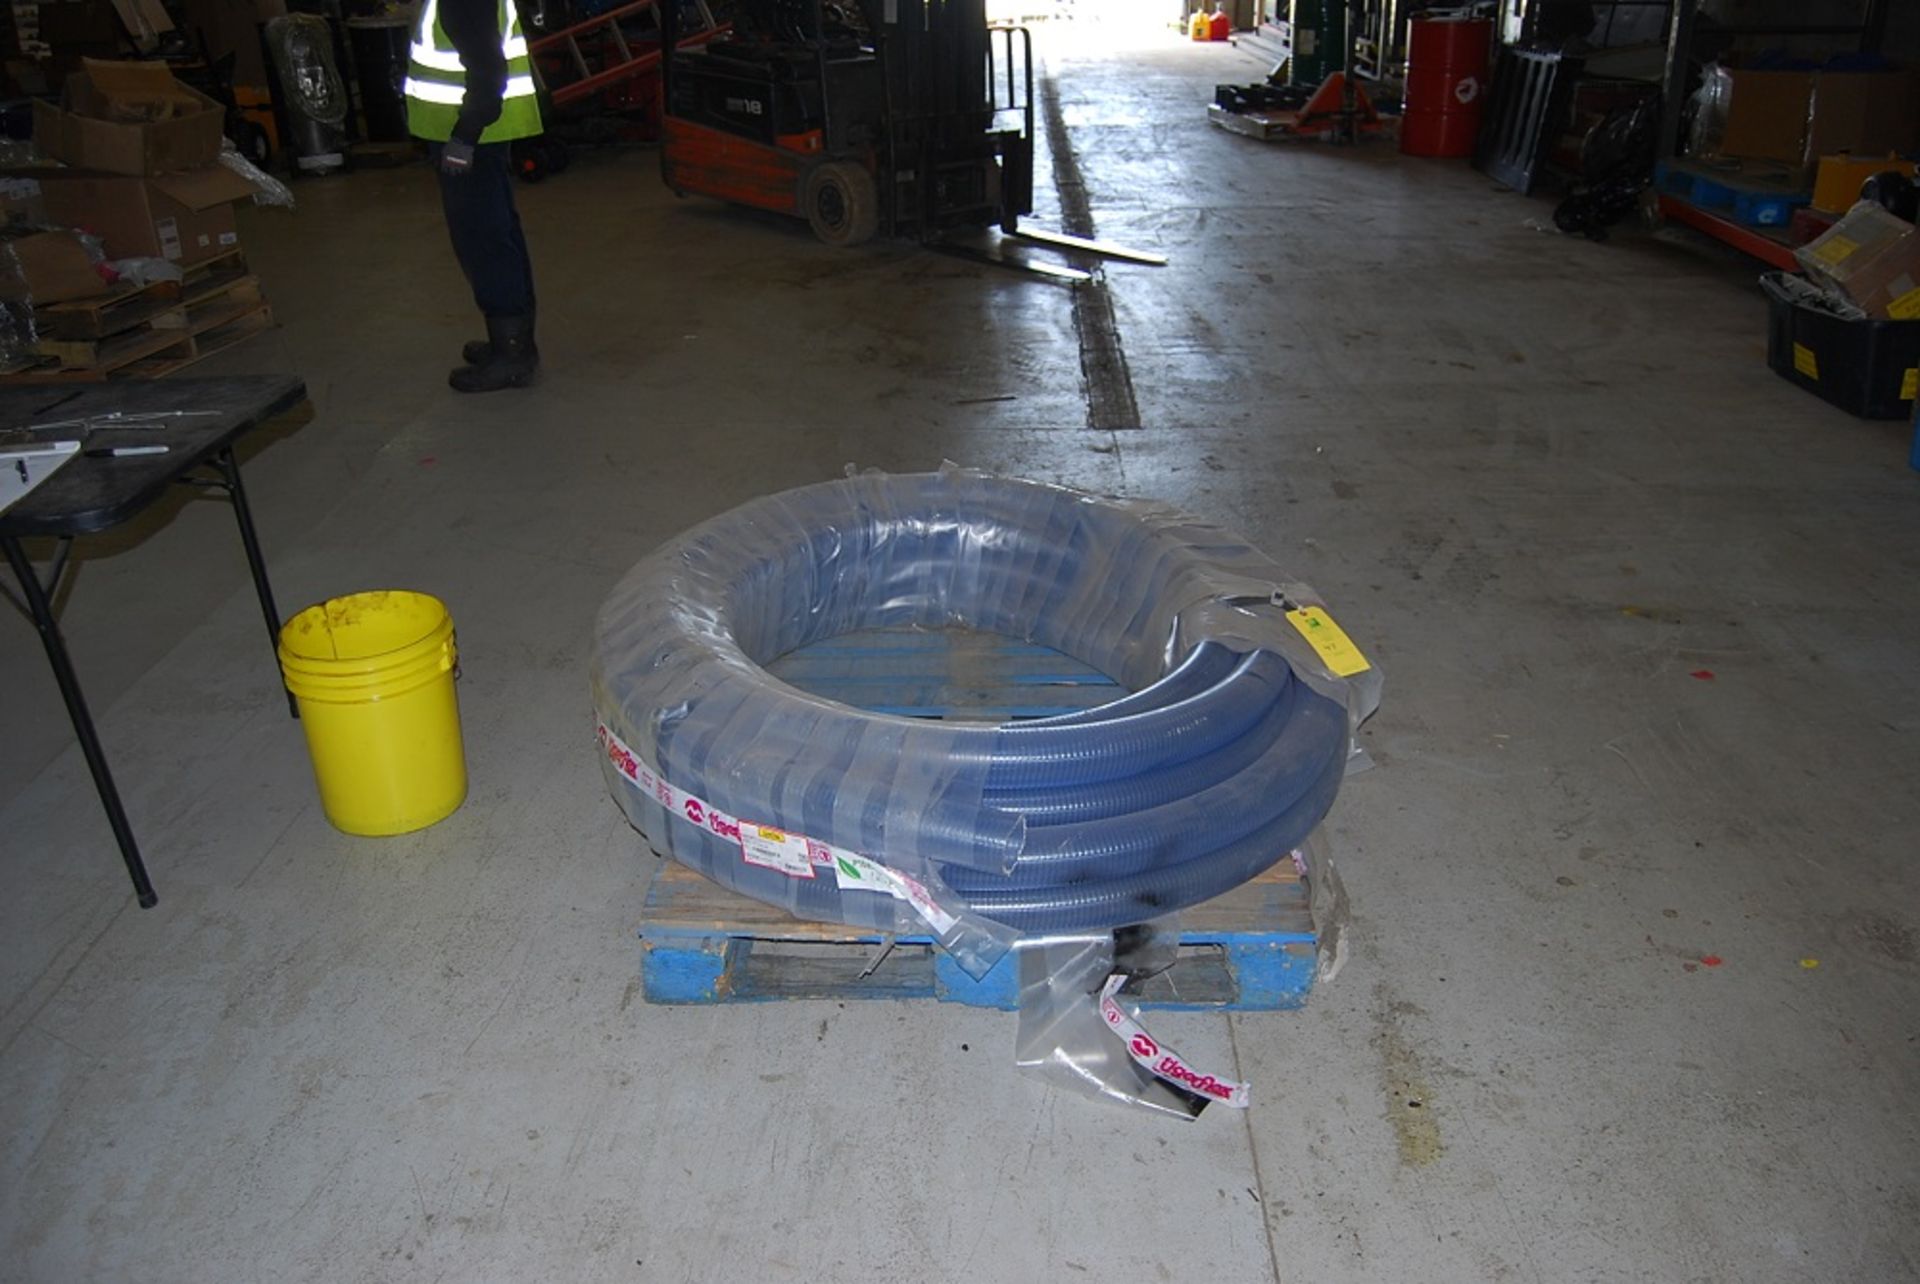 Tiger Flex Hose, Part # FT300x100, Desc: FT 3" x 100', Some hose has been used, but this is an